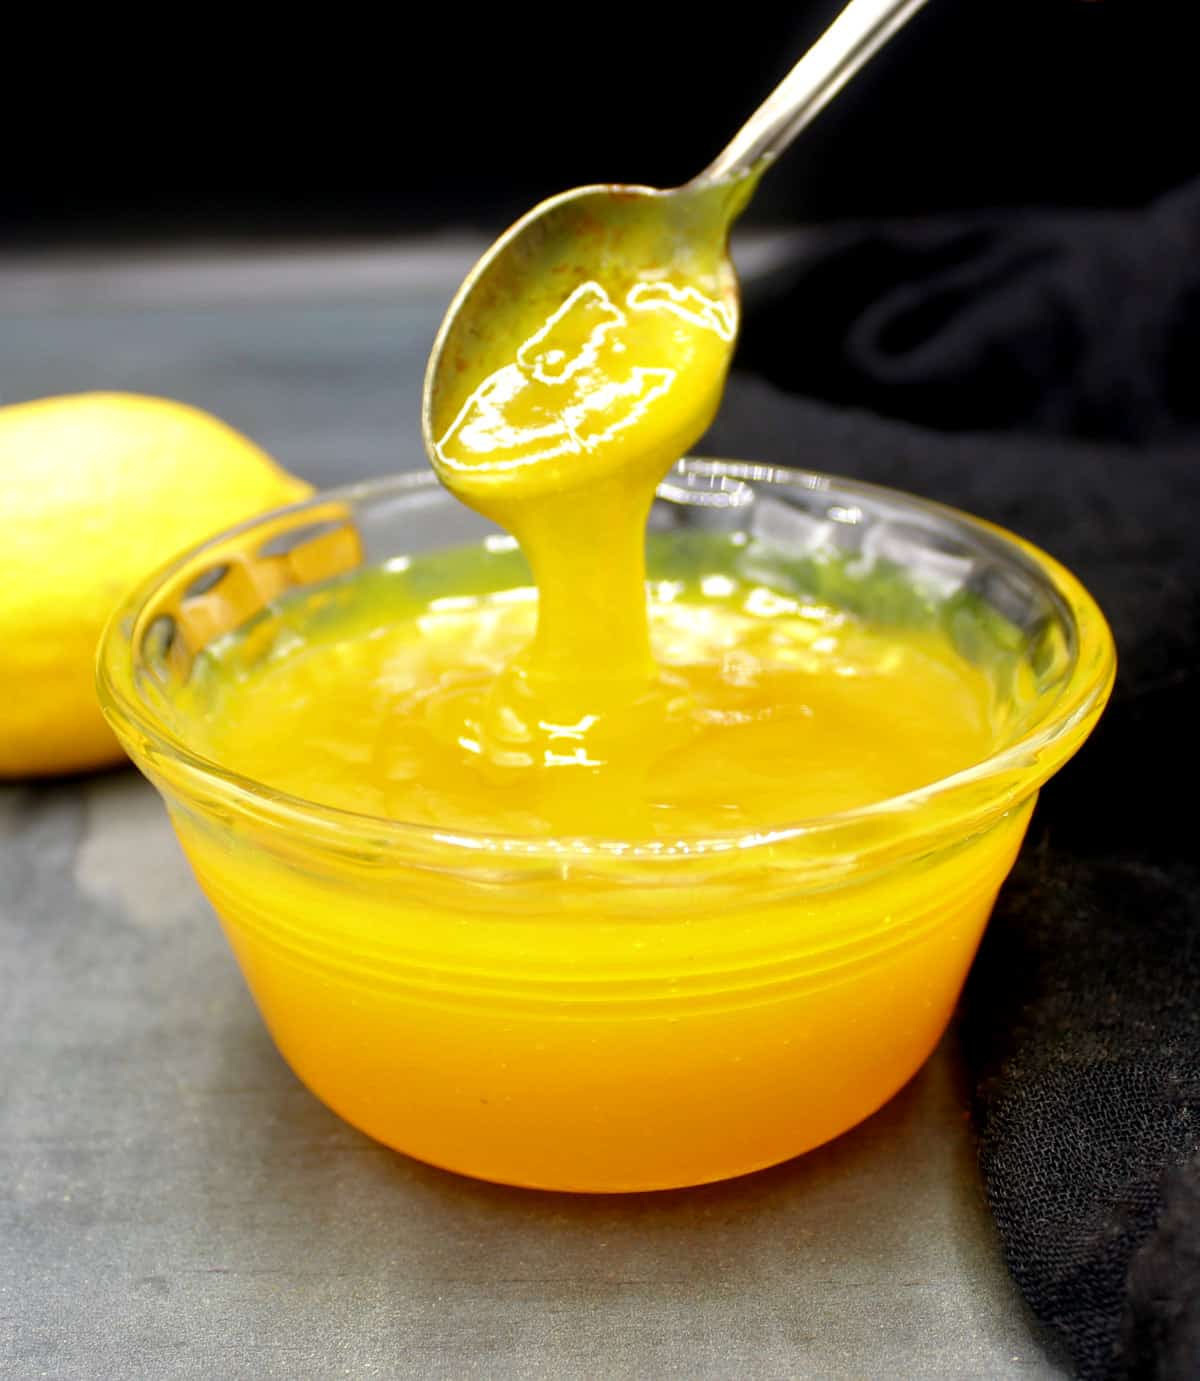 Vegan lemon curd being poured into bowl with spoon.